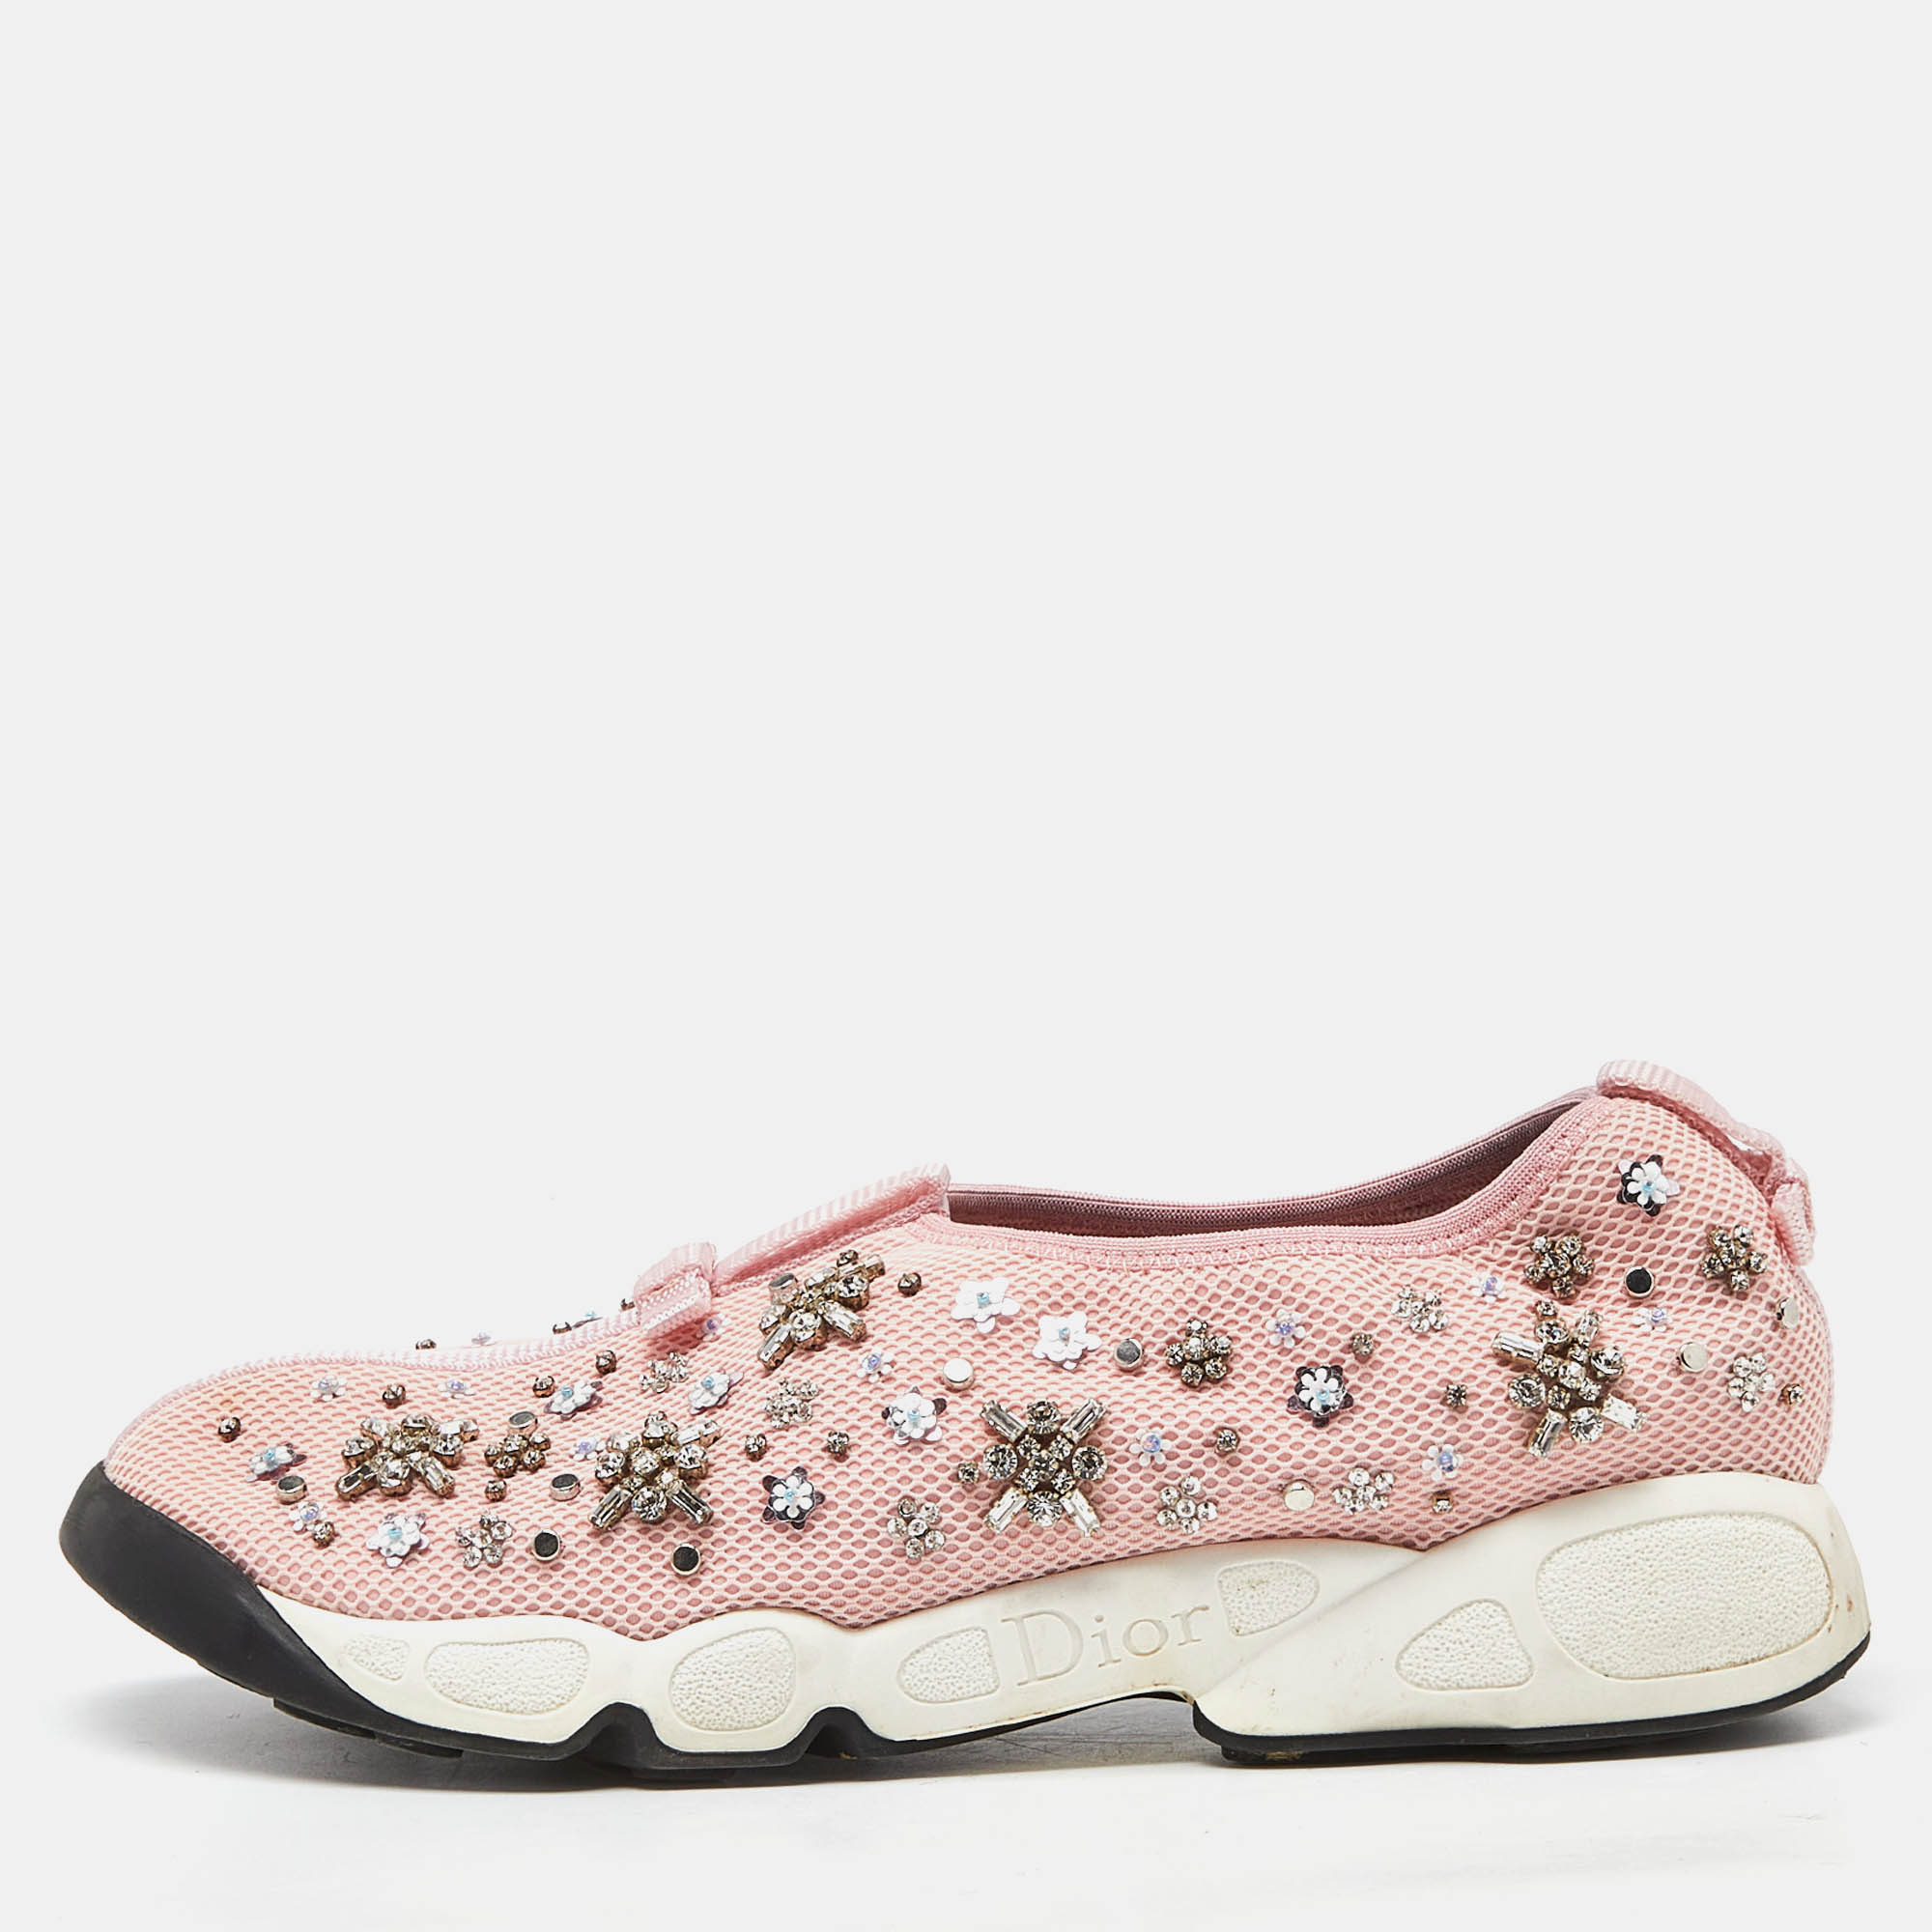 These Dior Fusion sneakers has the perfect amalgamation of a striking appeal and practical ease. Created beautifully from pink mesh it is decorated with attractive embellishments. The leather insoles and rubber soles makes sure these shoes ensures relaxed movement.